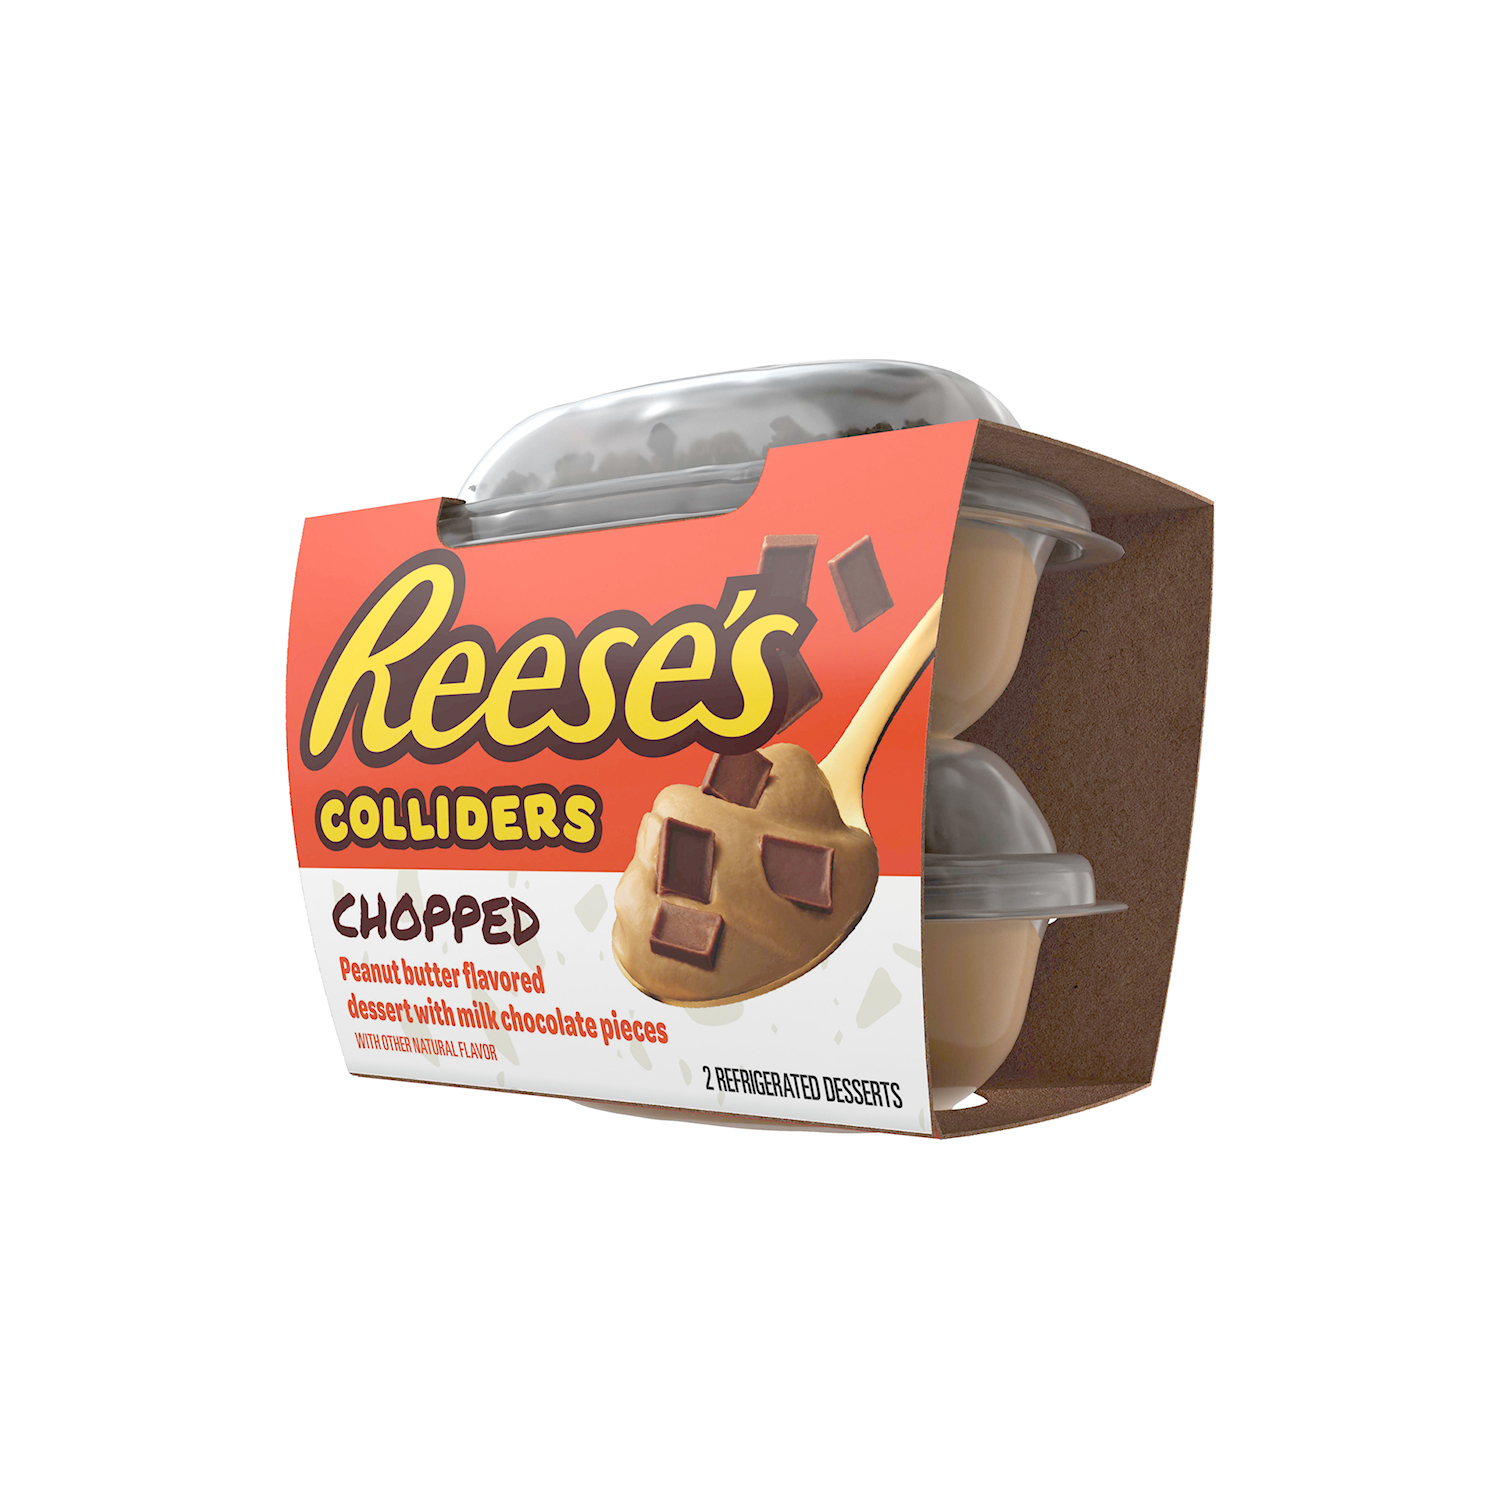 REESE'S COLLIDERS™ Chopped Dessert, 7 oz, 2 pack - Right of Package